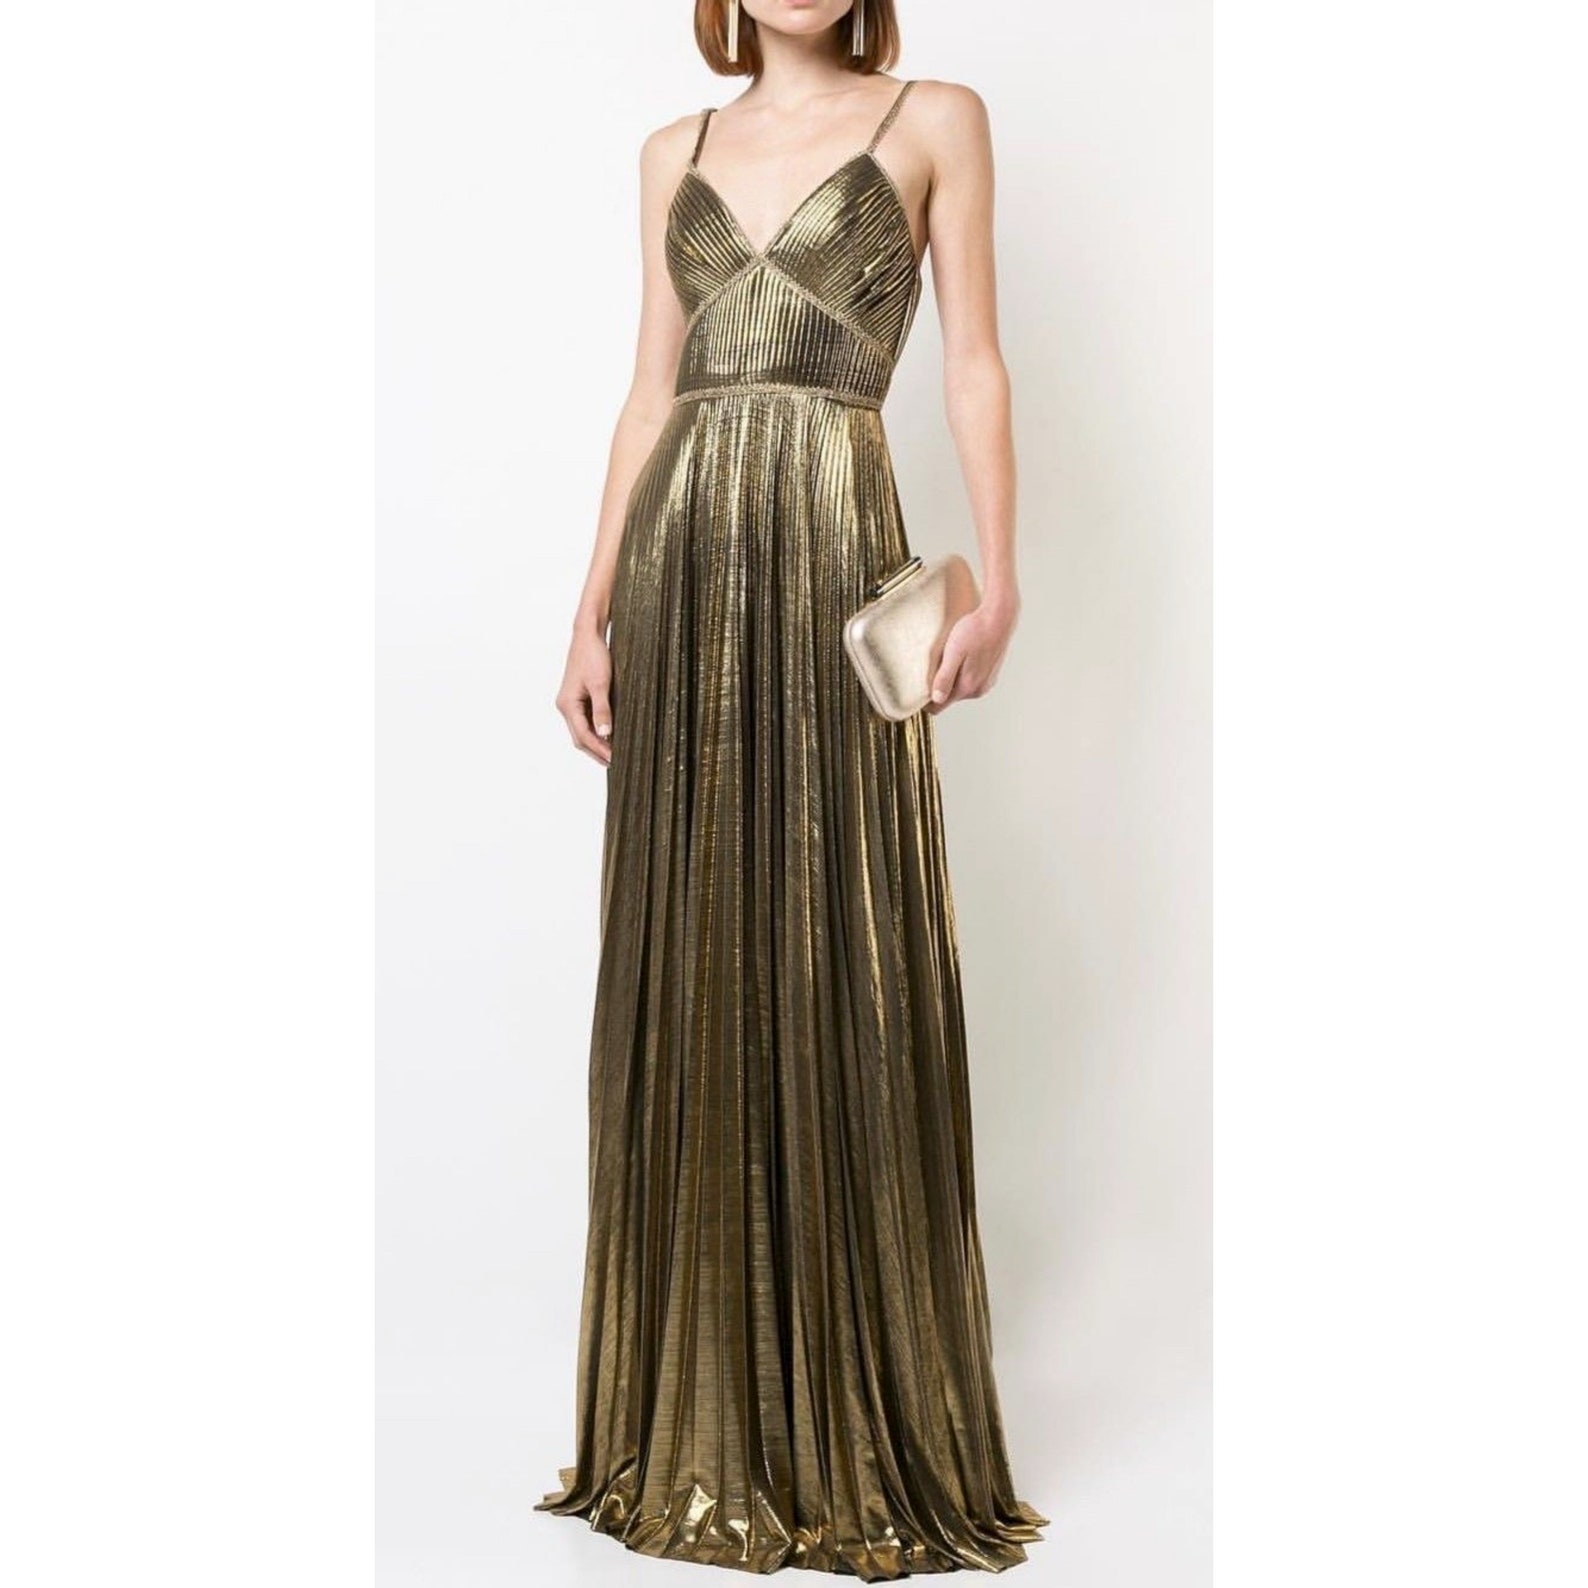 Look gorgeous in these captivating metallic foil print pleated dresses.